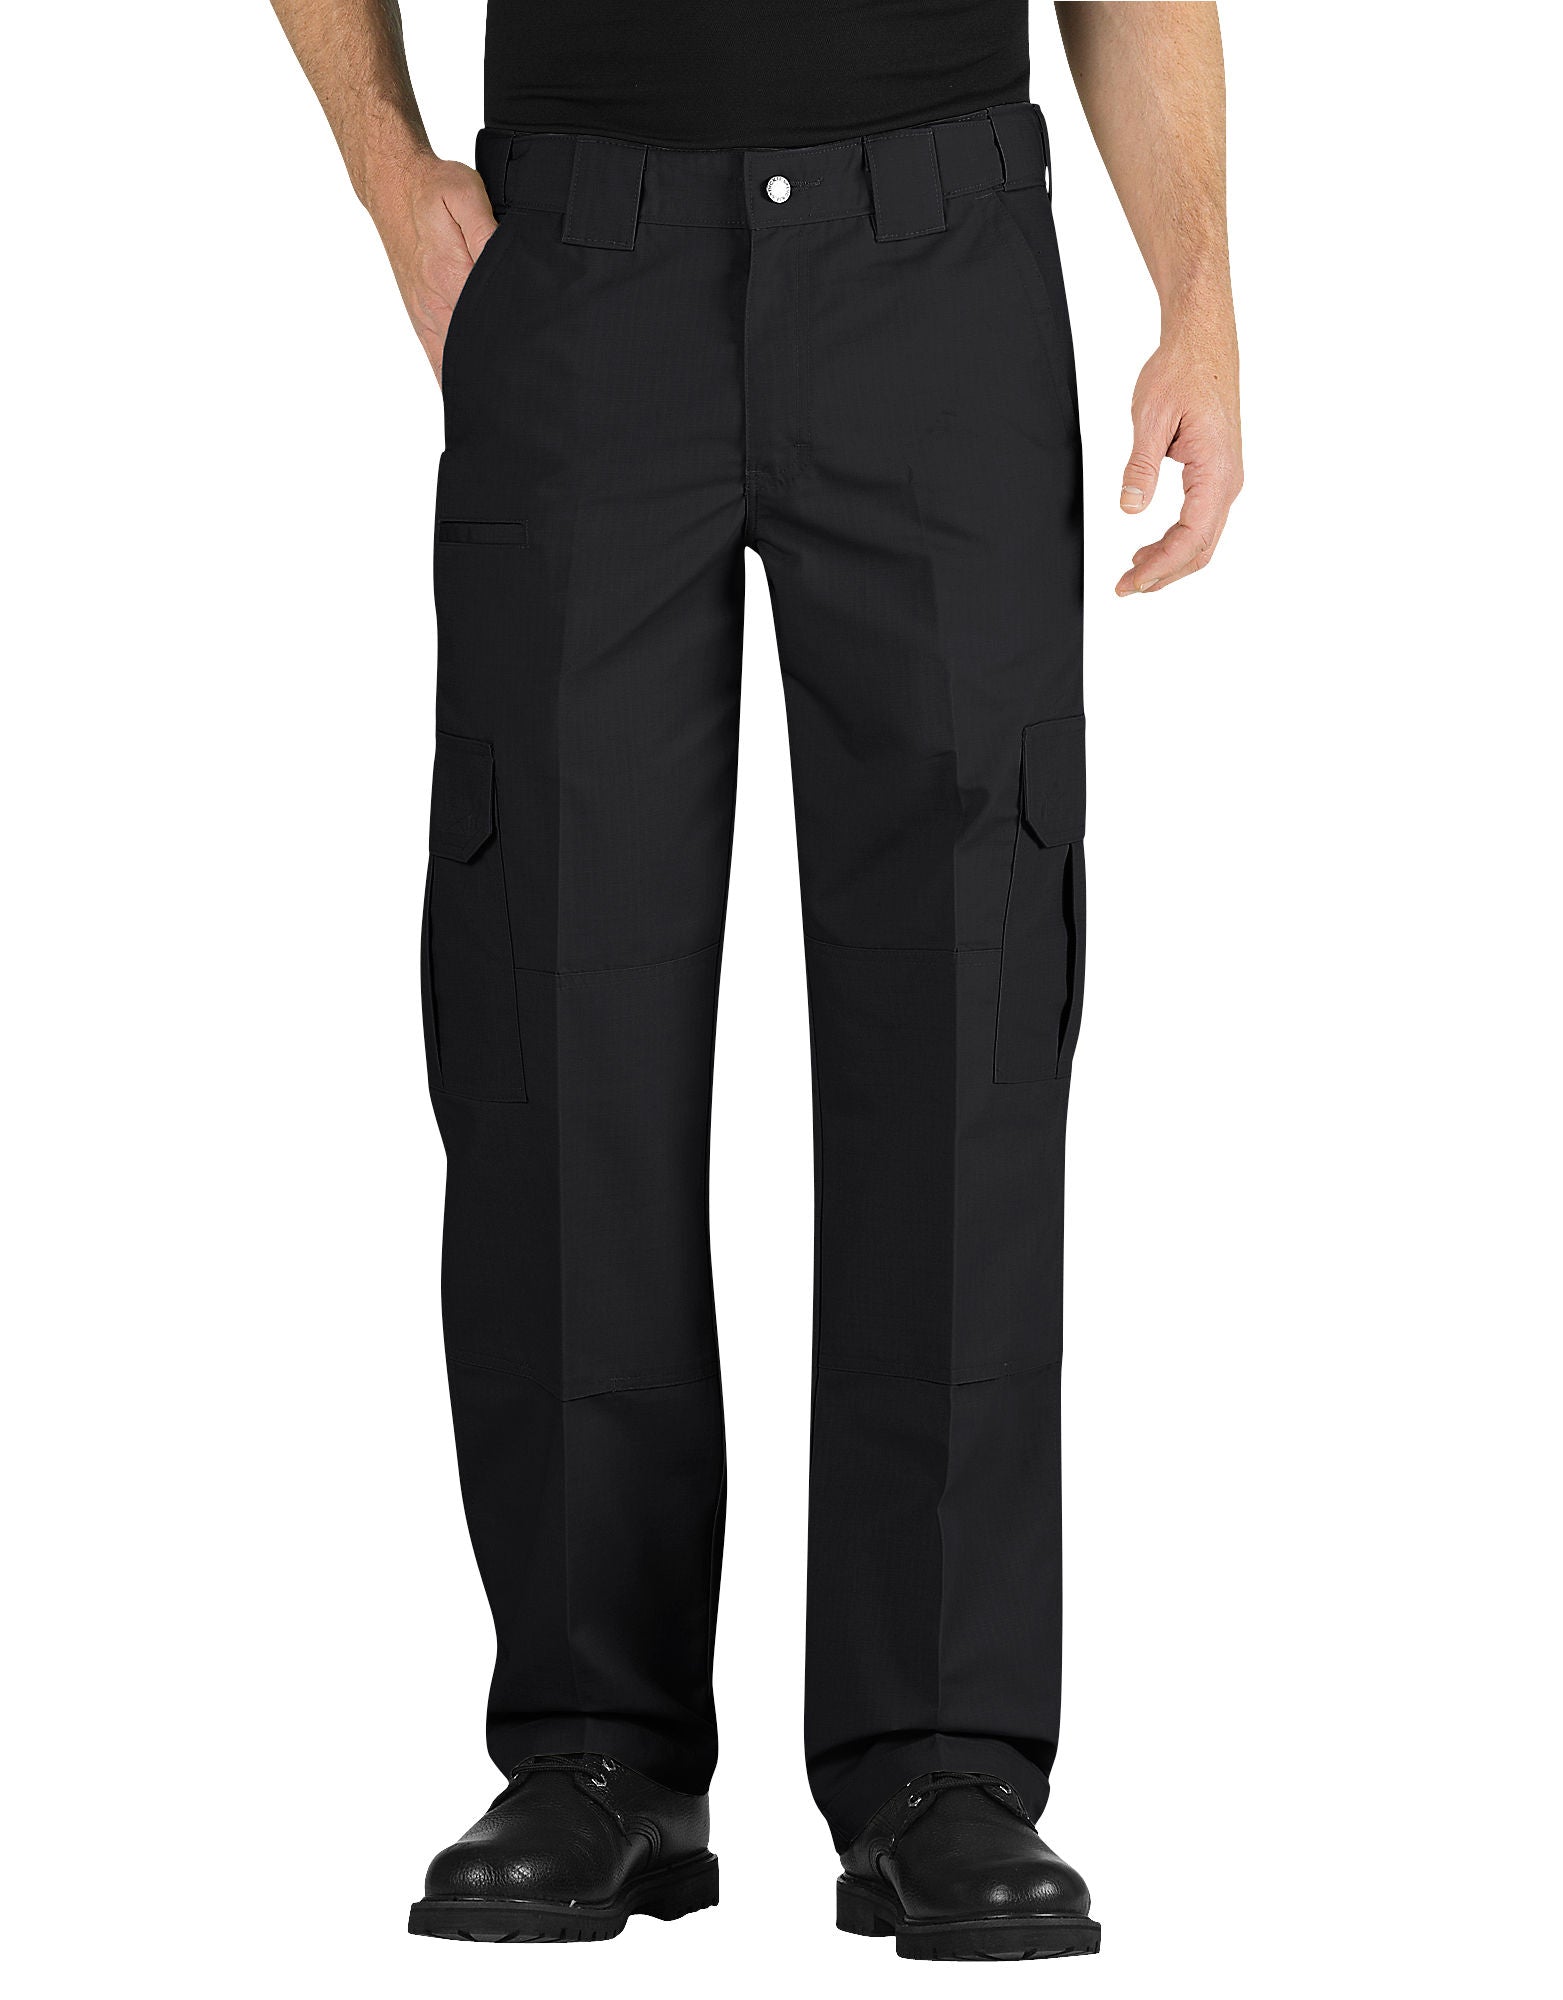 DIC-LP703 - Dickies Mens Tactical Relaxed Fit Straight Leg Lightweight ...